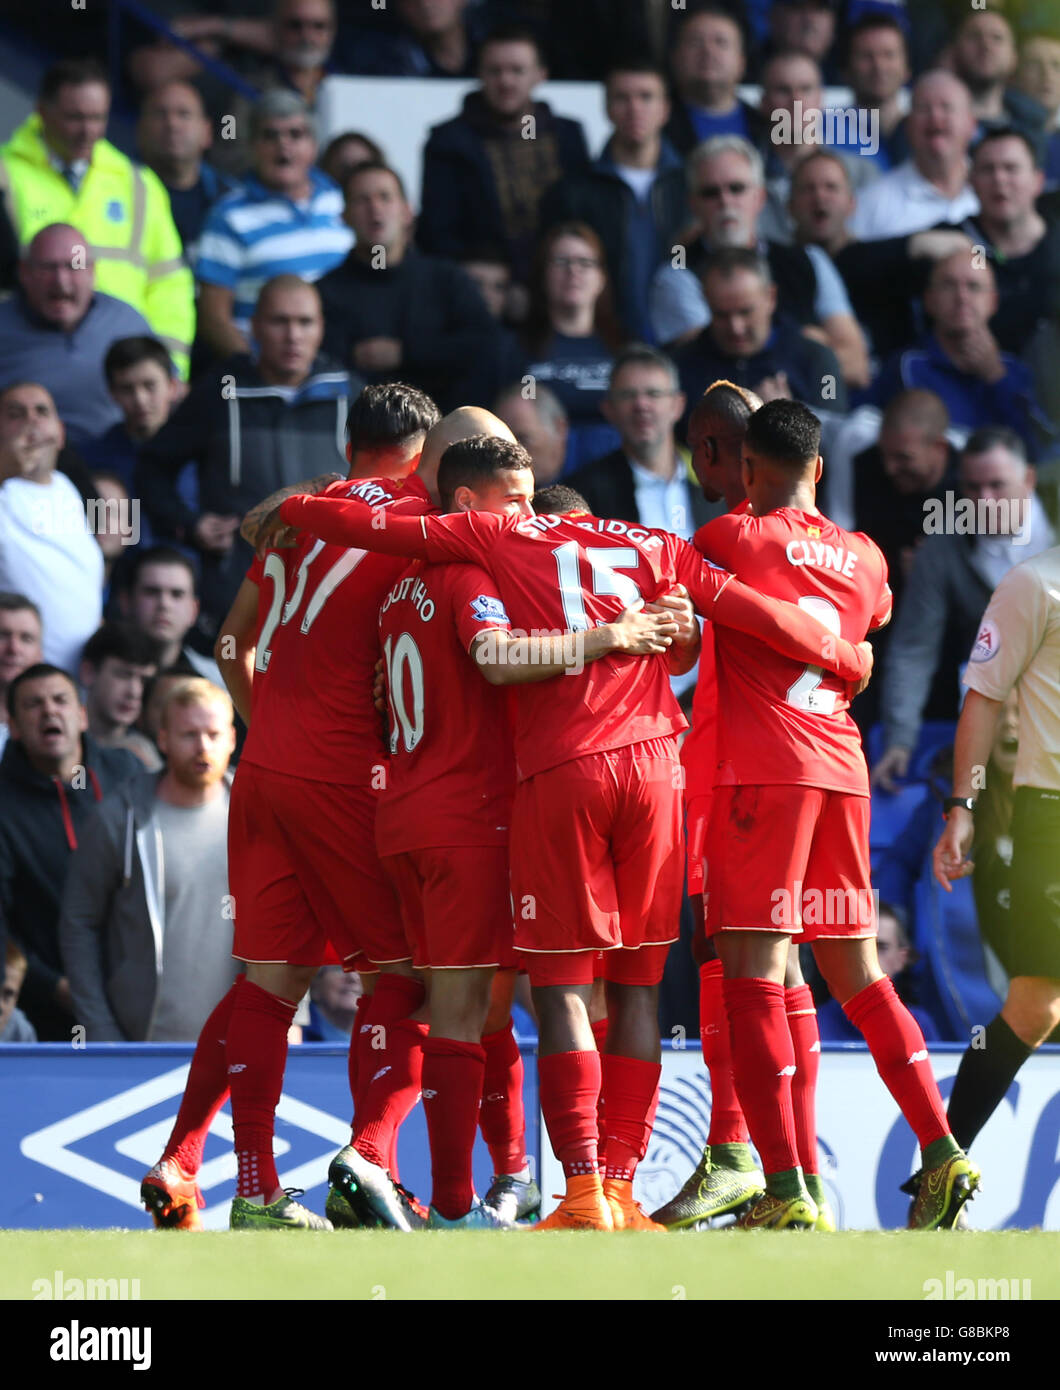 Soccer - Barclays Premier League - Everton v Liverpool - Goodison Park. Liverpool's Danny Ings celebrates scoring his side's first goal of the game with teammates Stock Photo